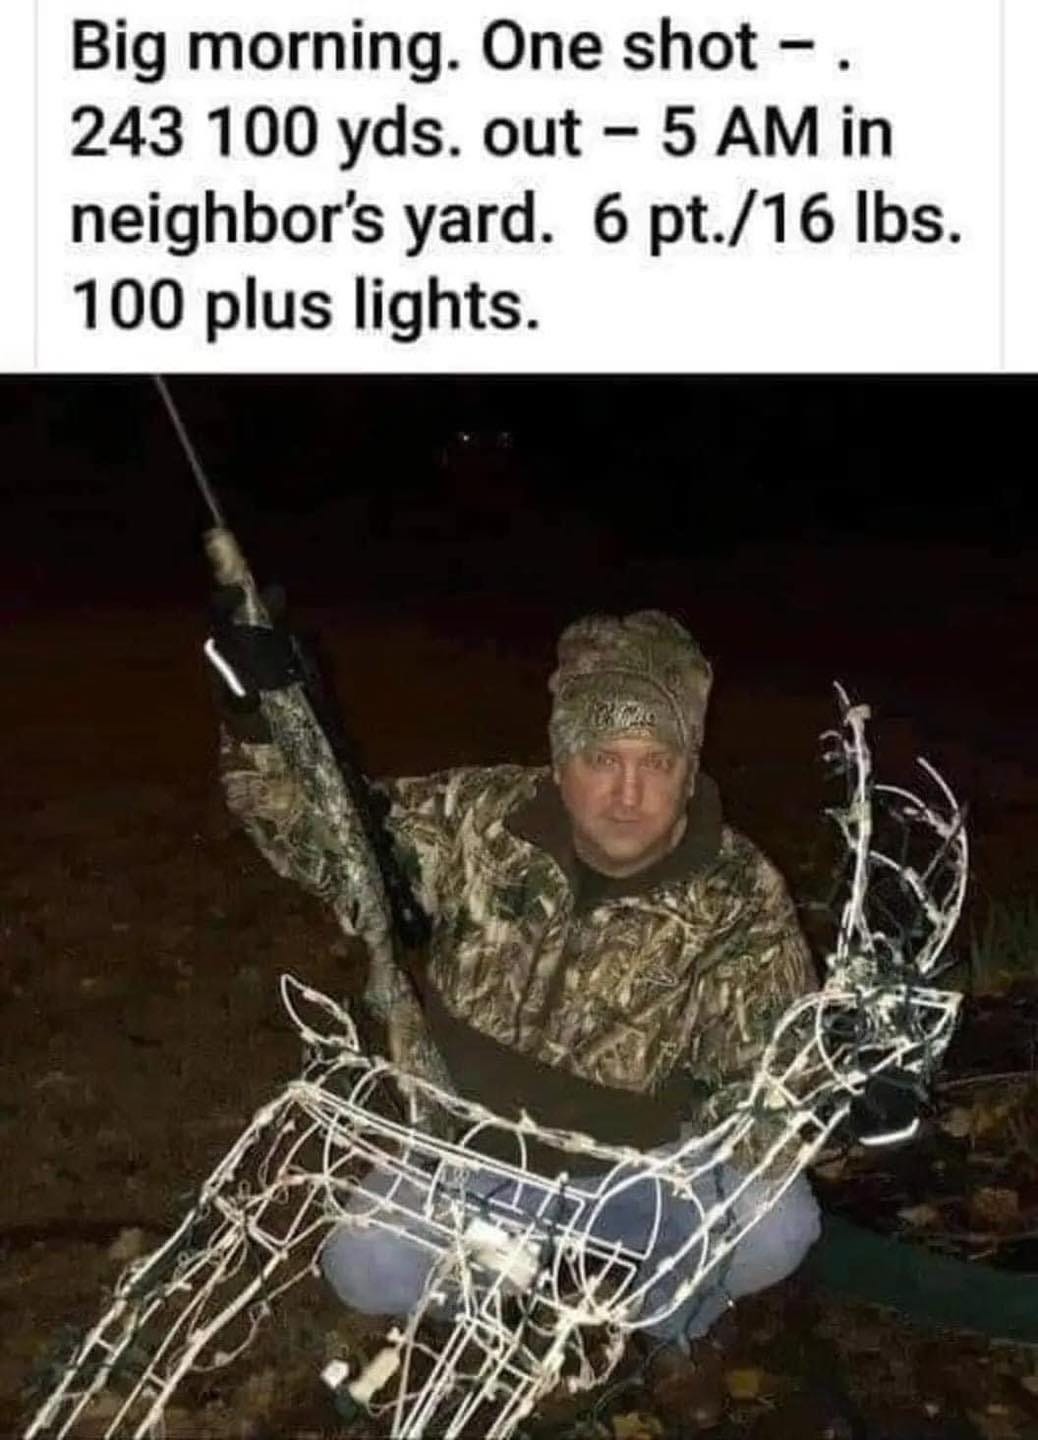 May be an image of 1 person and text that says 'Big morning. One shot 243 100 yds. out 5 AM in neighbor's yard. 6 pt./16 lbs. 100 plus lights.'